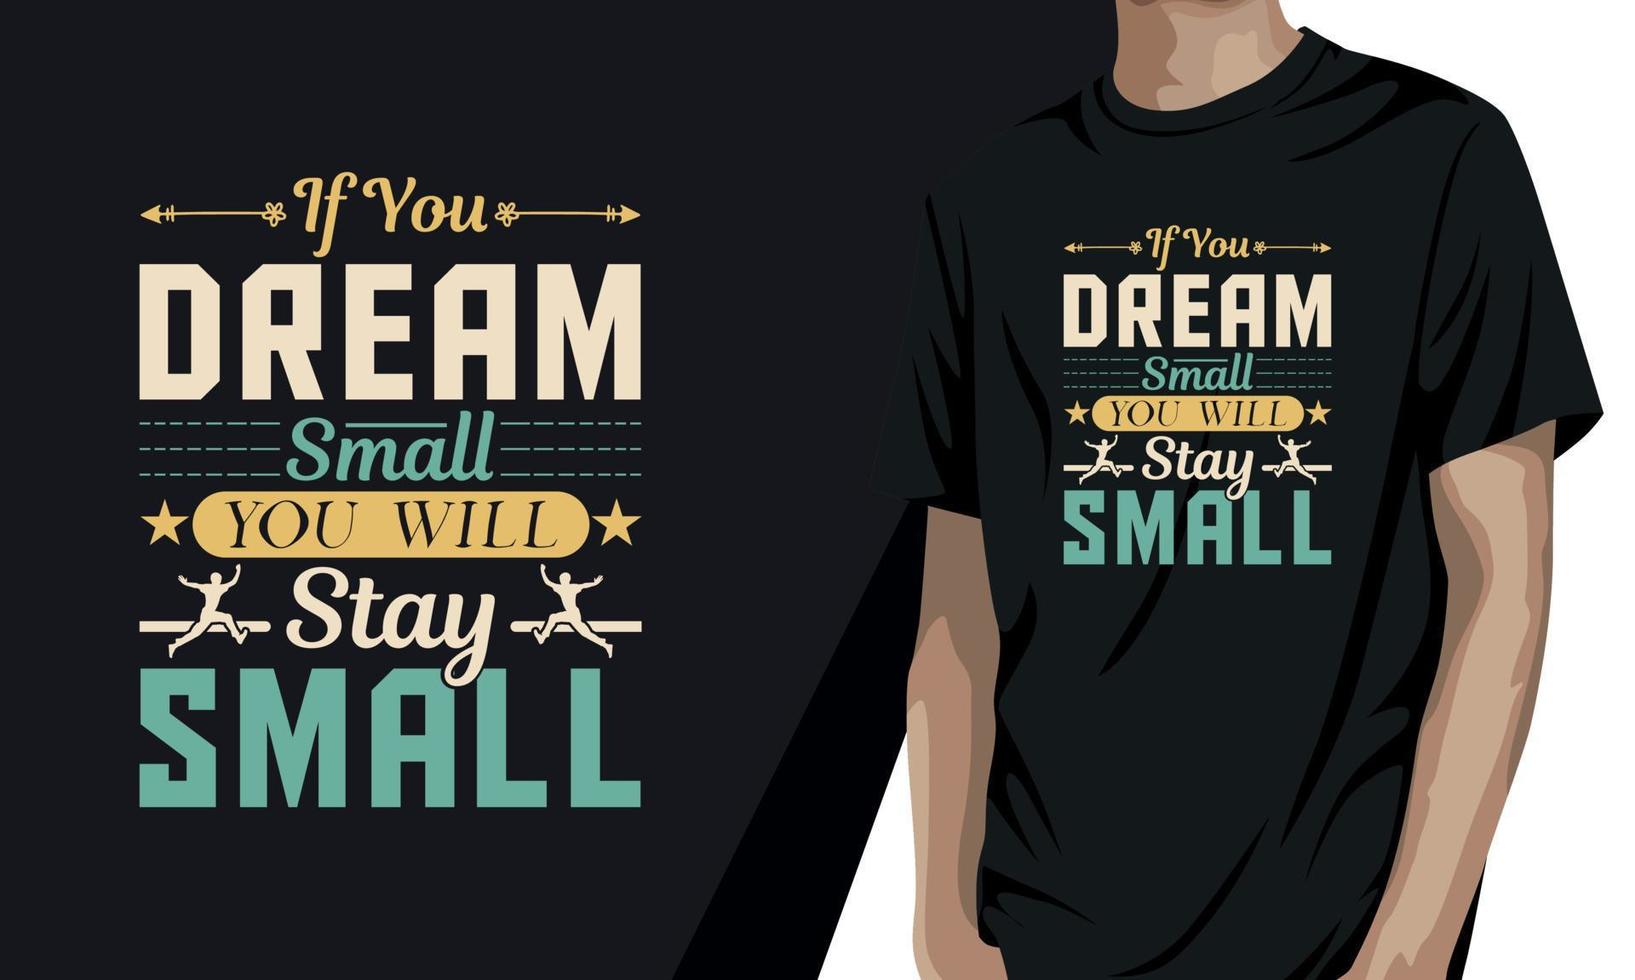 If you dream small you will stay small, motivational t shirt design vector